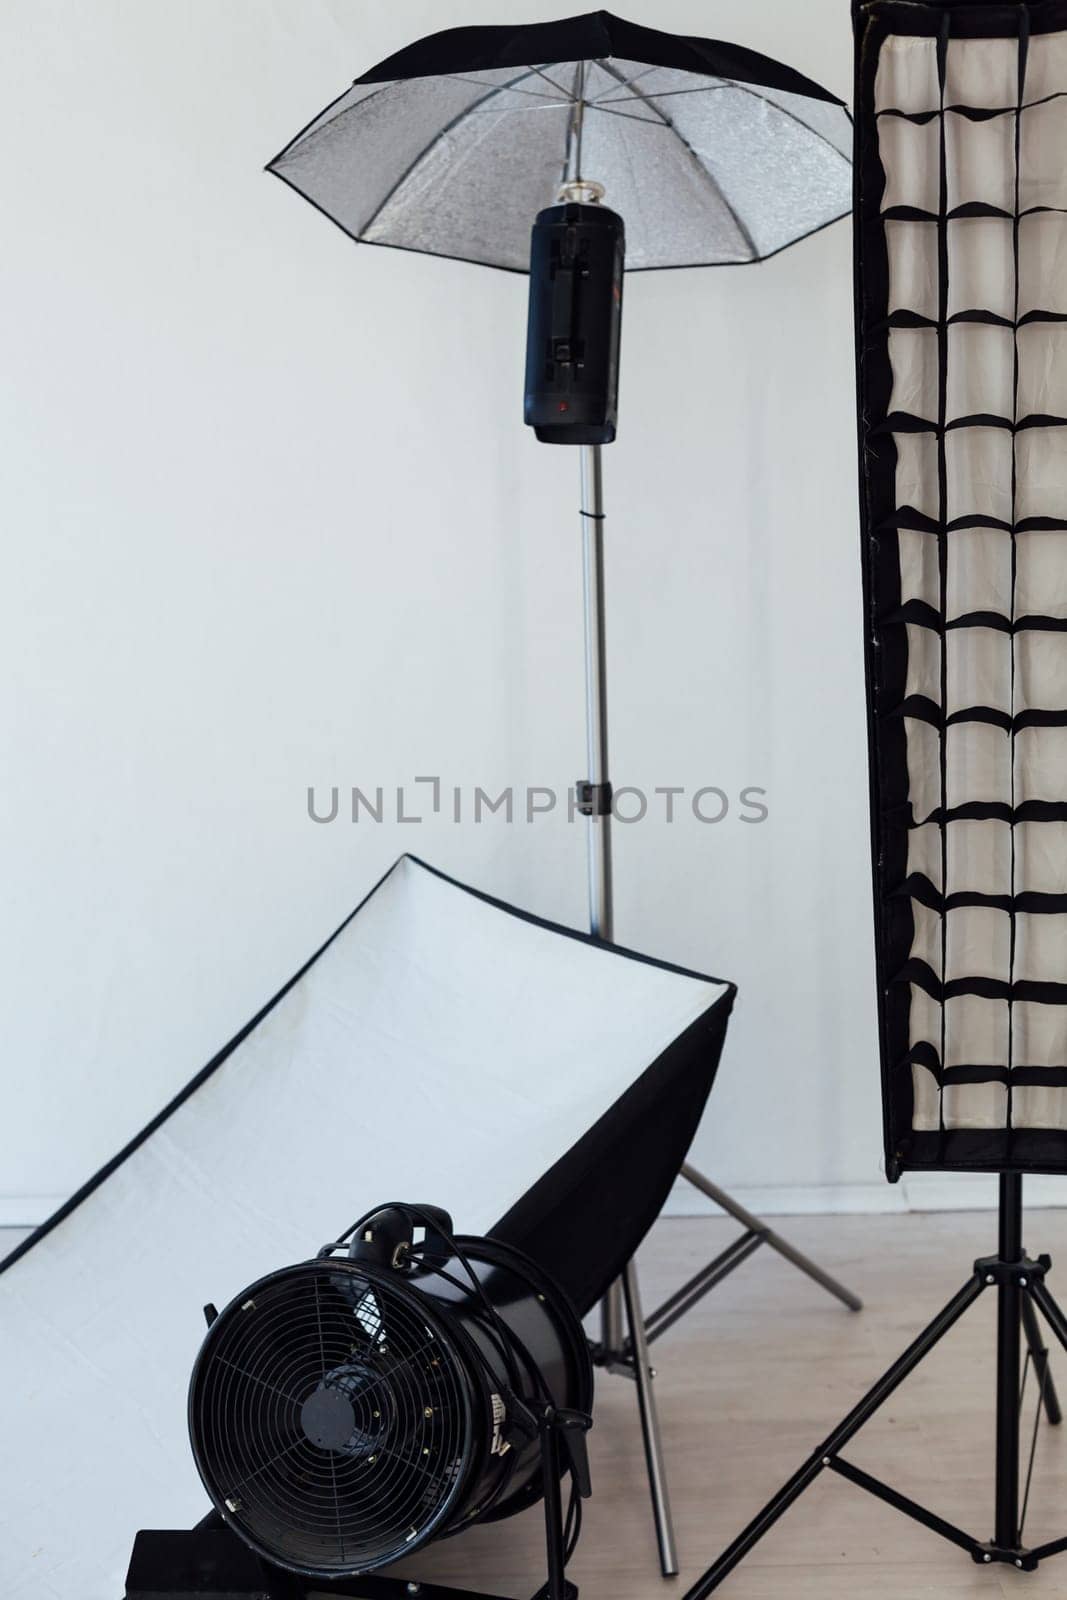 Photo studio equipment flash photographer accessories backgrounds by Simakov